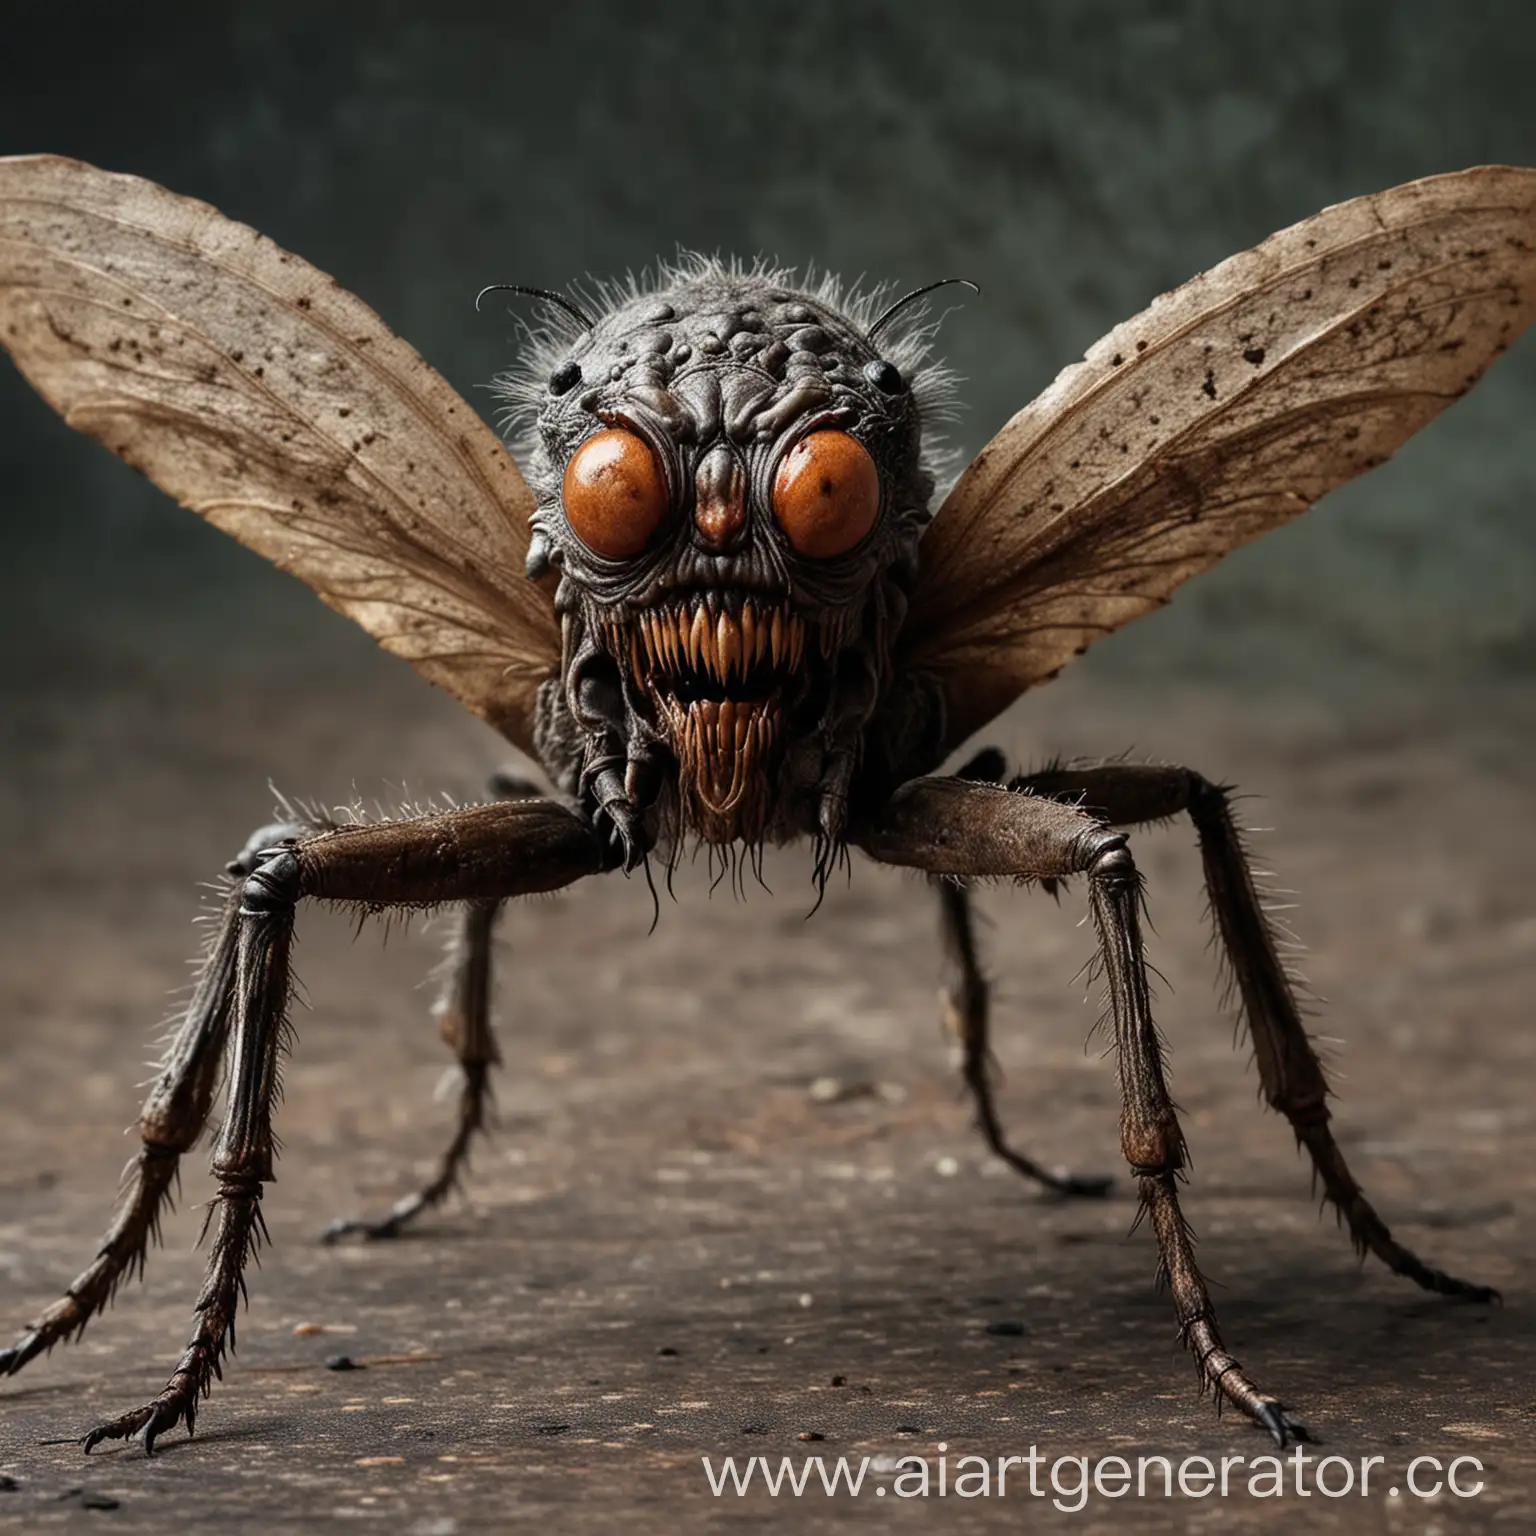 Terrifying-Ugly-Monster-Insect-Emerging-from-Darkness